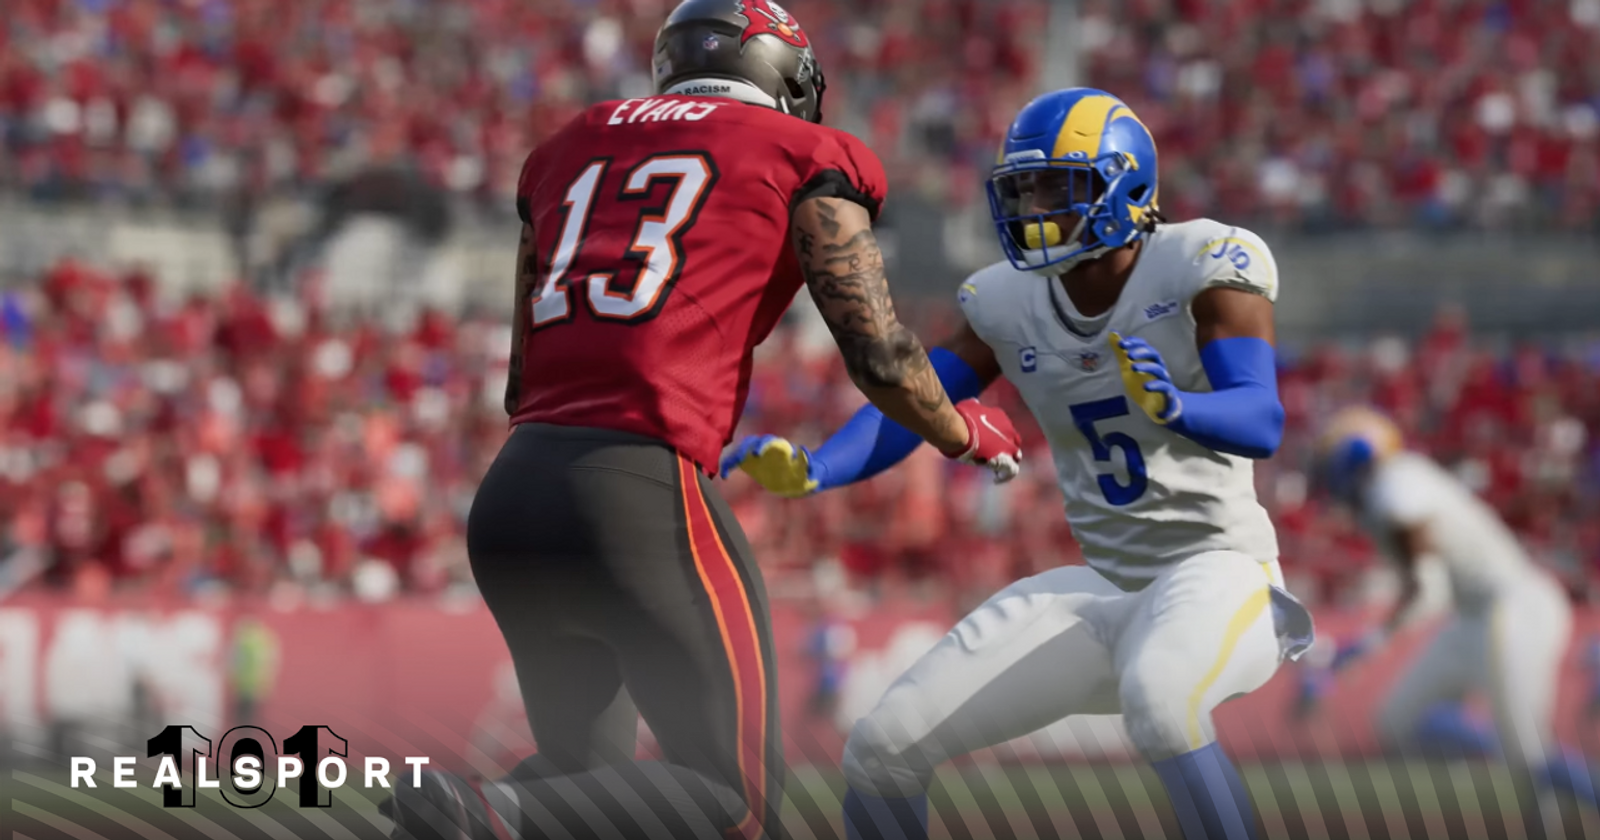 Madden NFL 22 Will Be Free-to-Play on PS5, PS4, for Season Kick